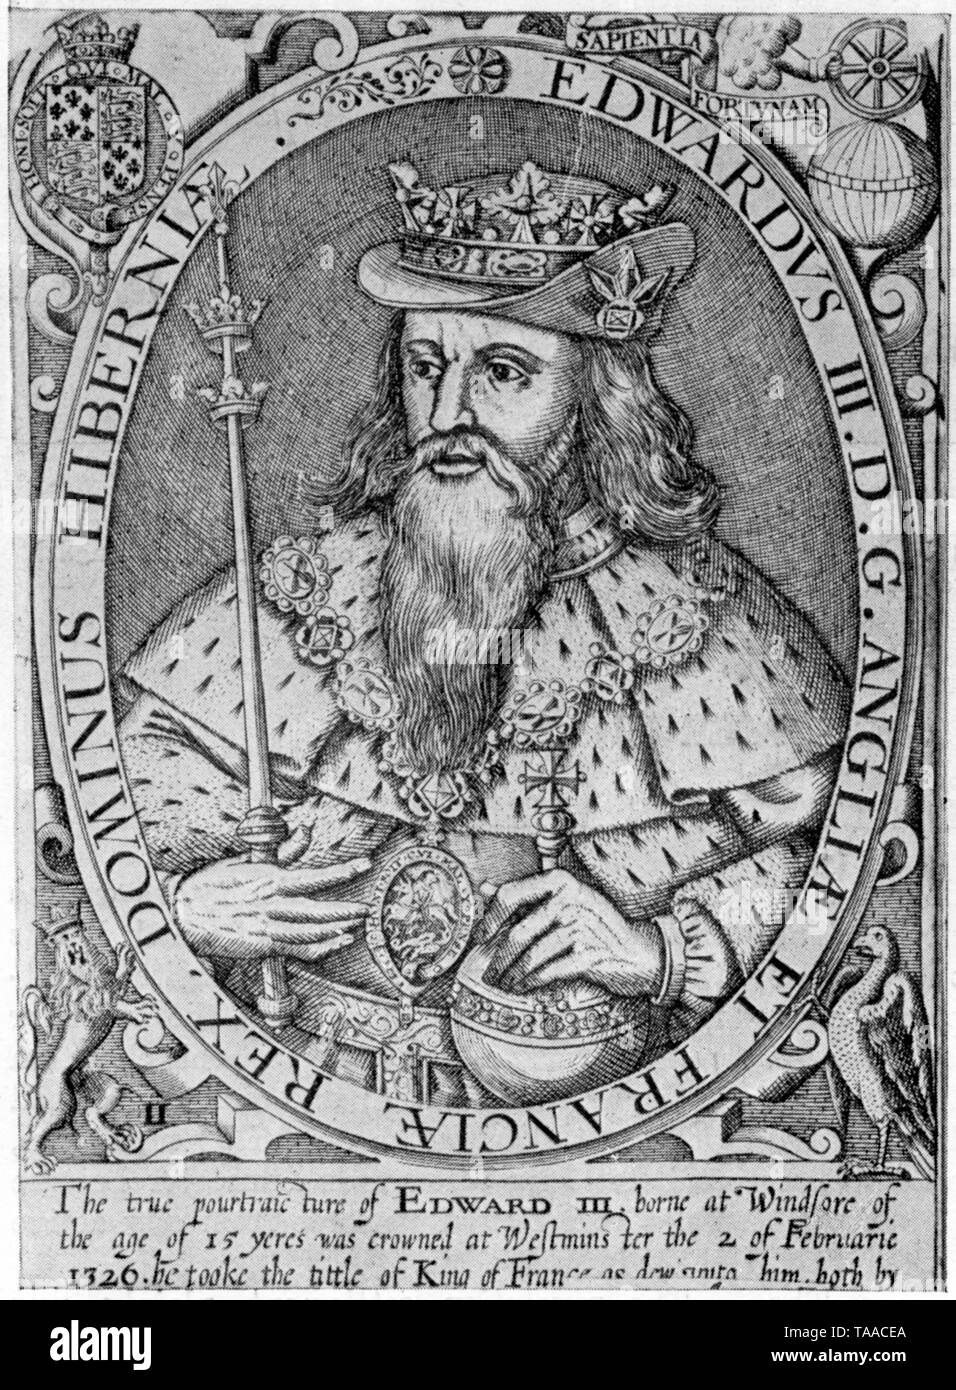 Edward III (1312-1377). By Renold Elstracke aka Reginold Elstrack (1570-after 1625). From an engraving by Renold Elstracke (1570-after 1625), 1618. Published in Martin's 'Kings of England', 1638. Here pictured the Plantagenet King Edward III (1312-1377). Stock Photo